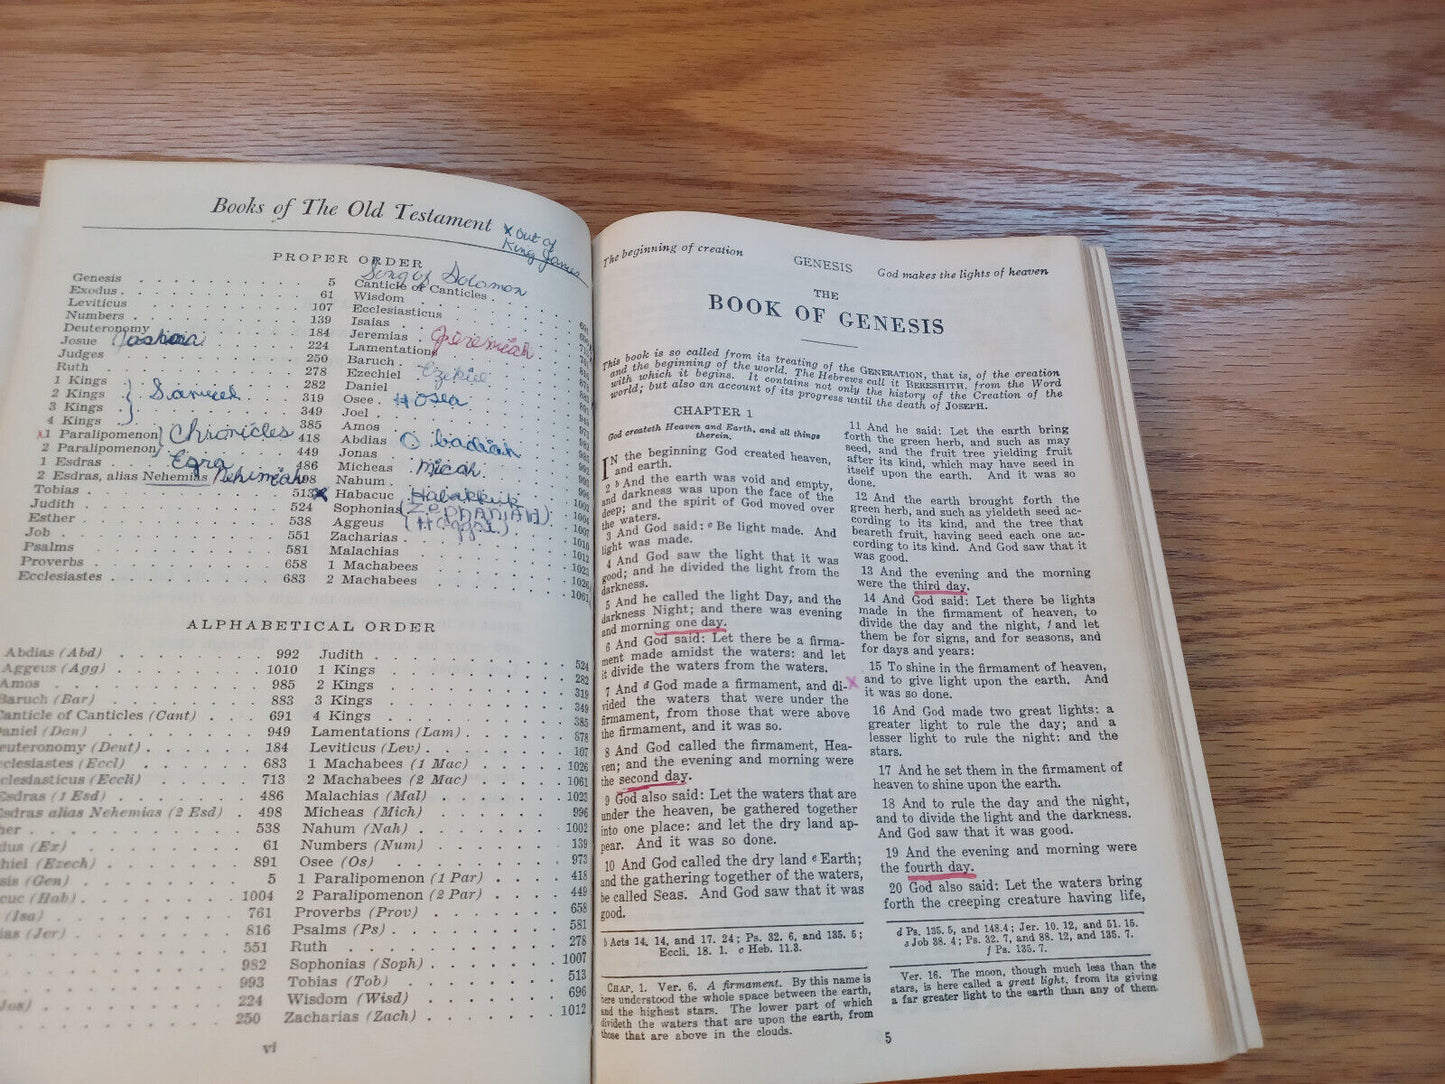 Holy Bible The Douay And The Confraternity Edition 1950